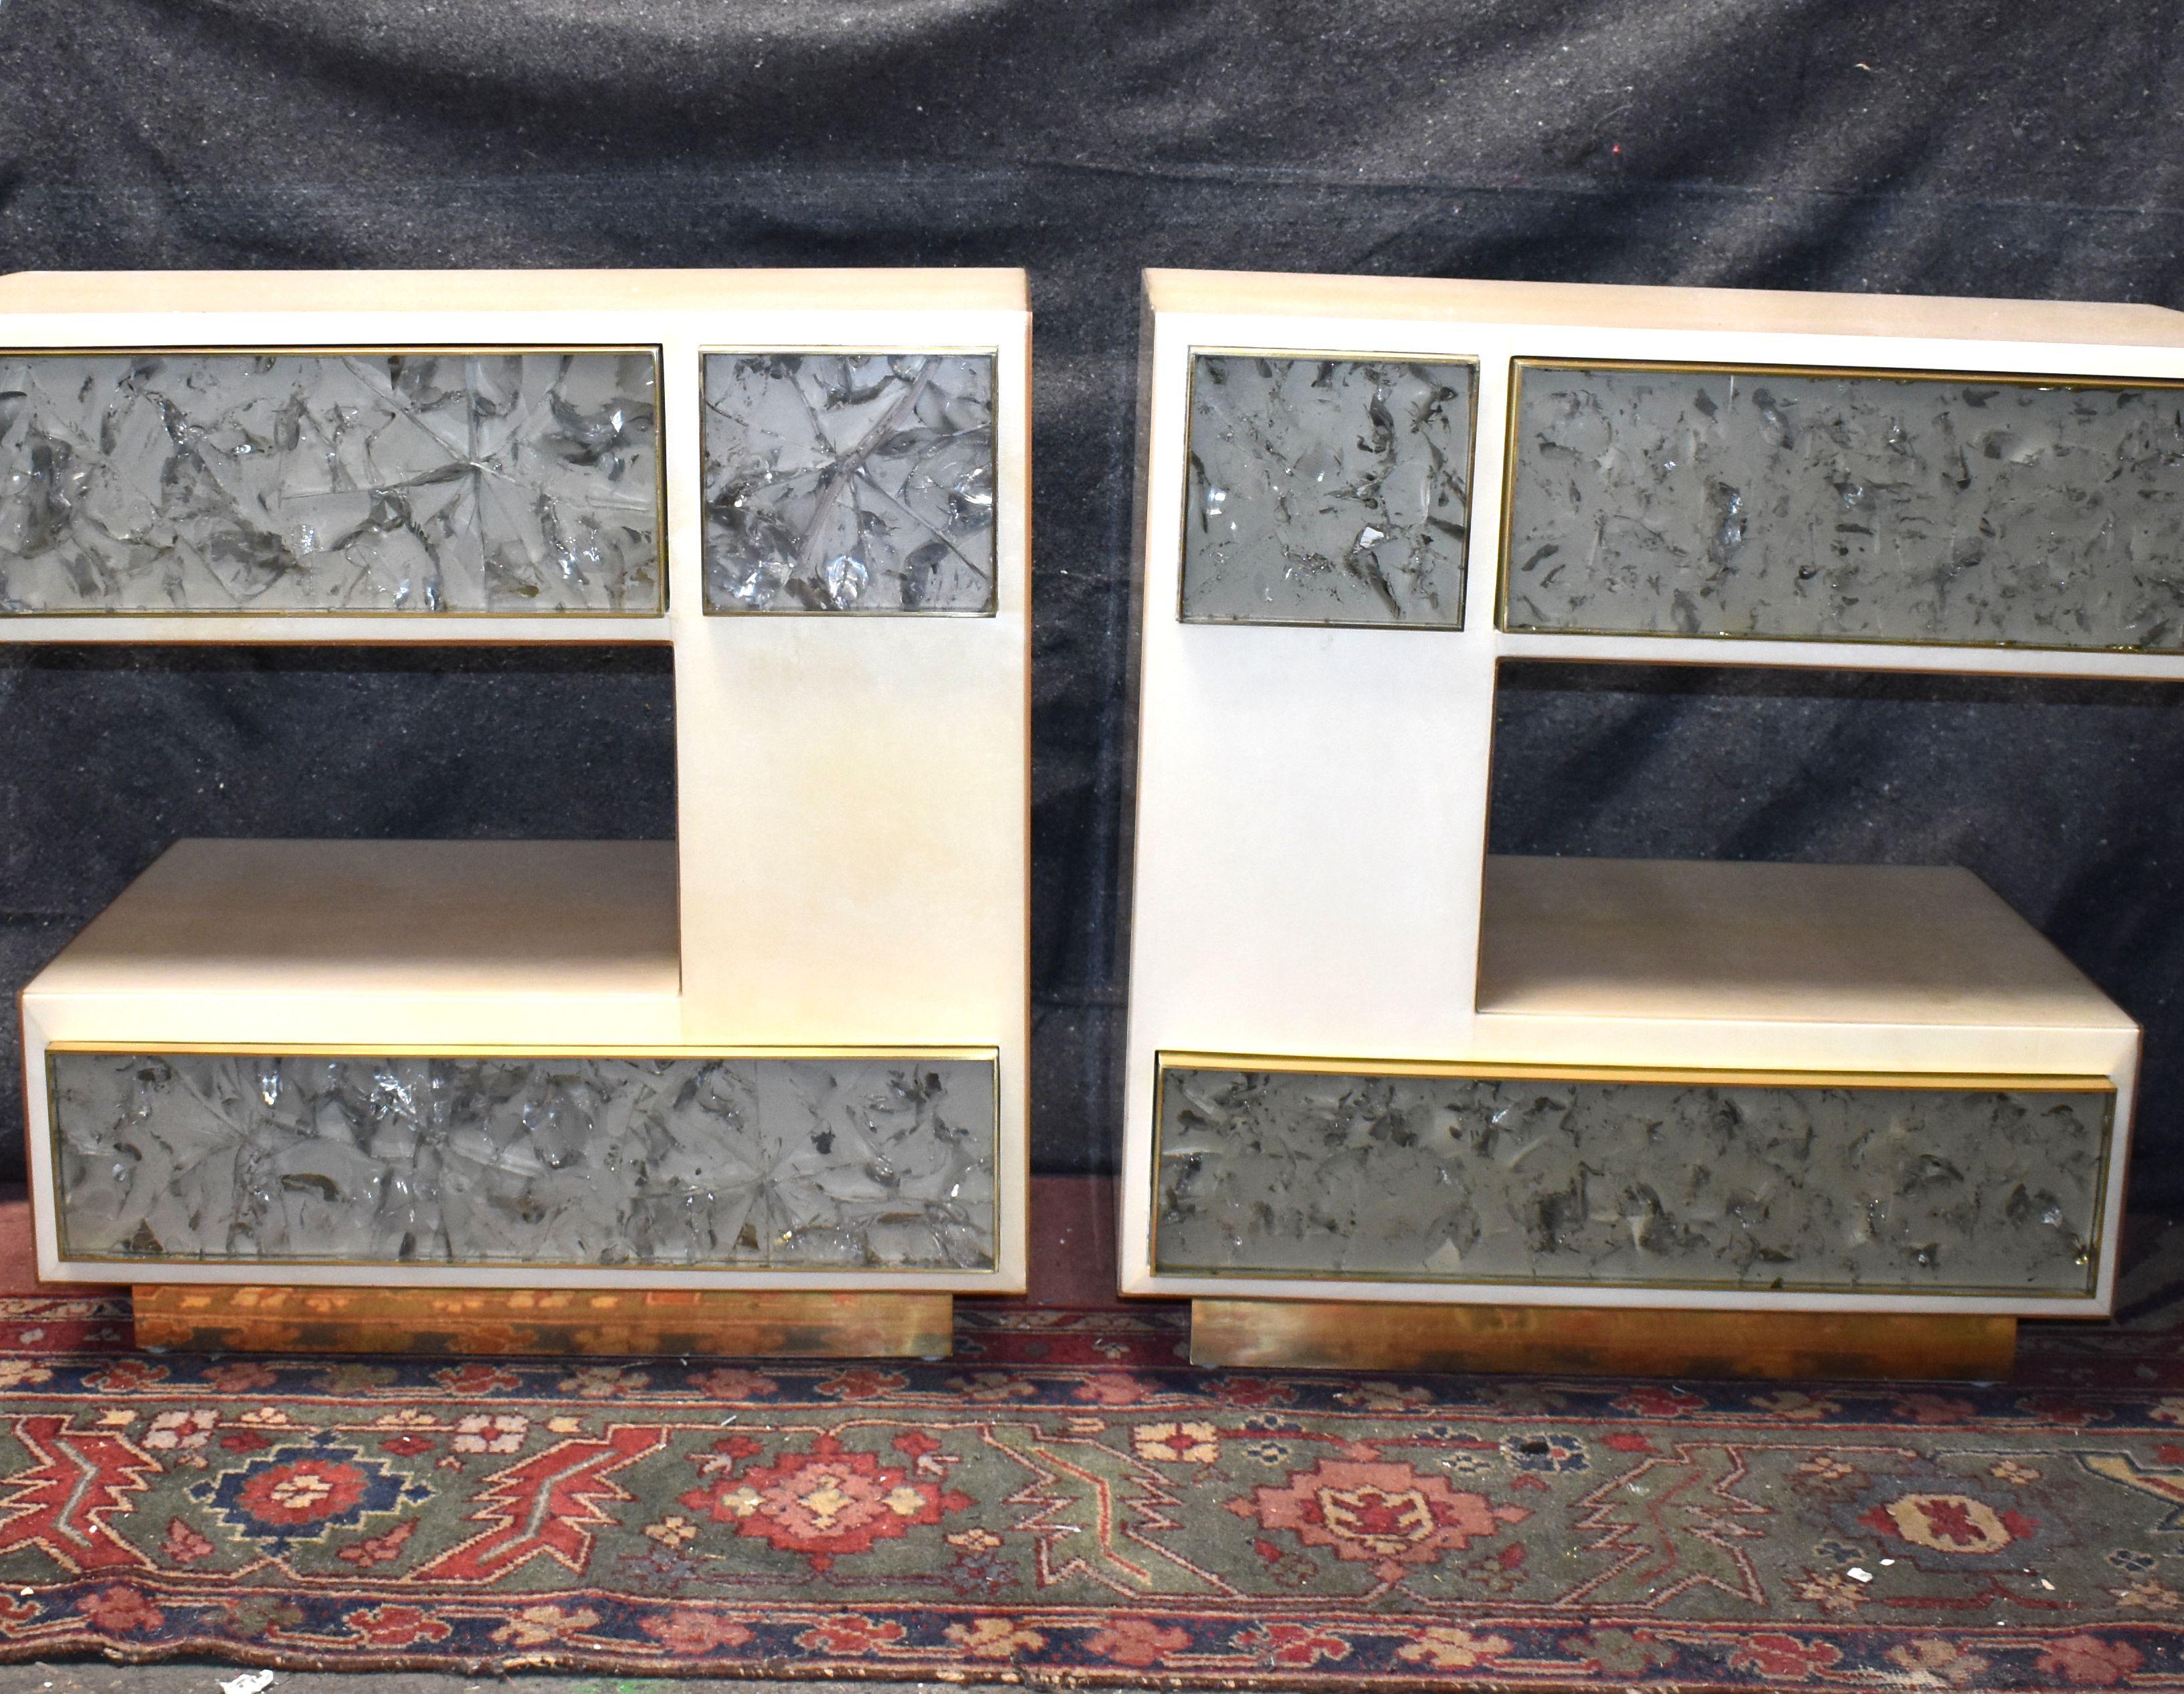 Pair of beside tables cover with goatskin and ice cracked resin details. Also can be use as side tables parchment cover all around tables and each table has two drawers with brass details.
Natural Parchment (High gloss polyester resin filled